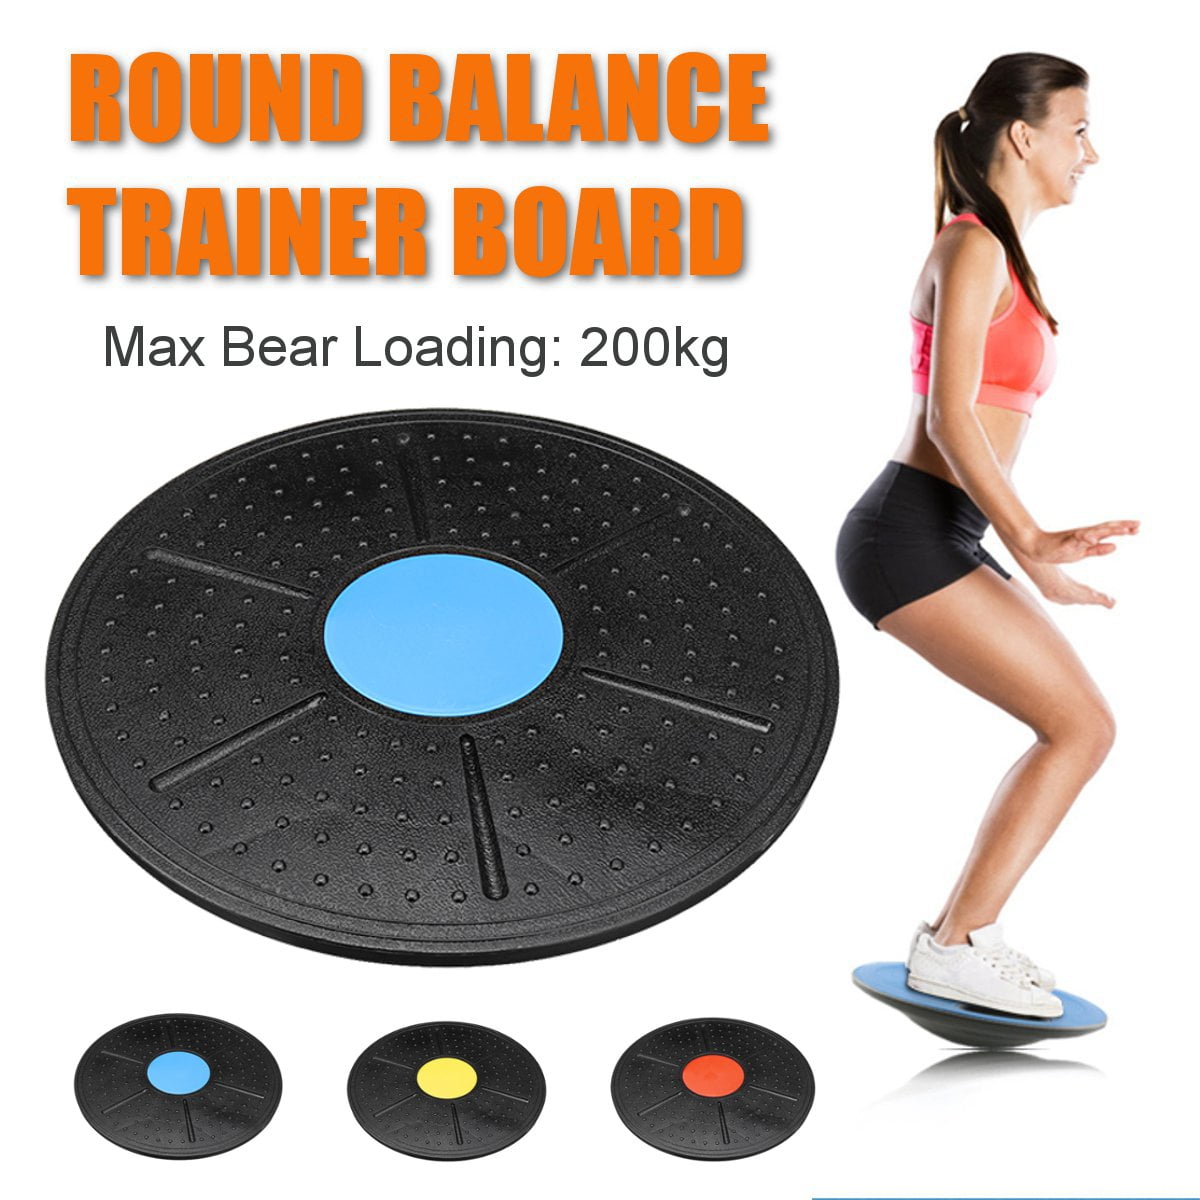 Exercise Balance Stability Trainer Portable Anti-Slip Wood Wobble Balance Board for Fitness Training Rehabilitation Exercise Wobble Balance Board